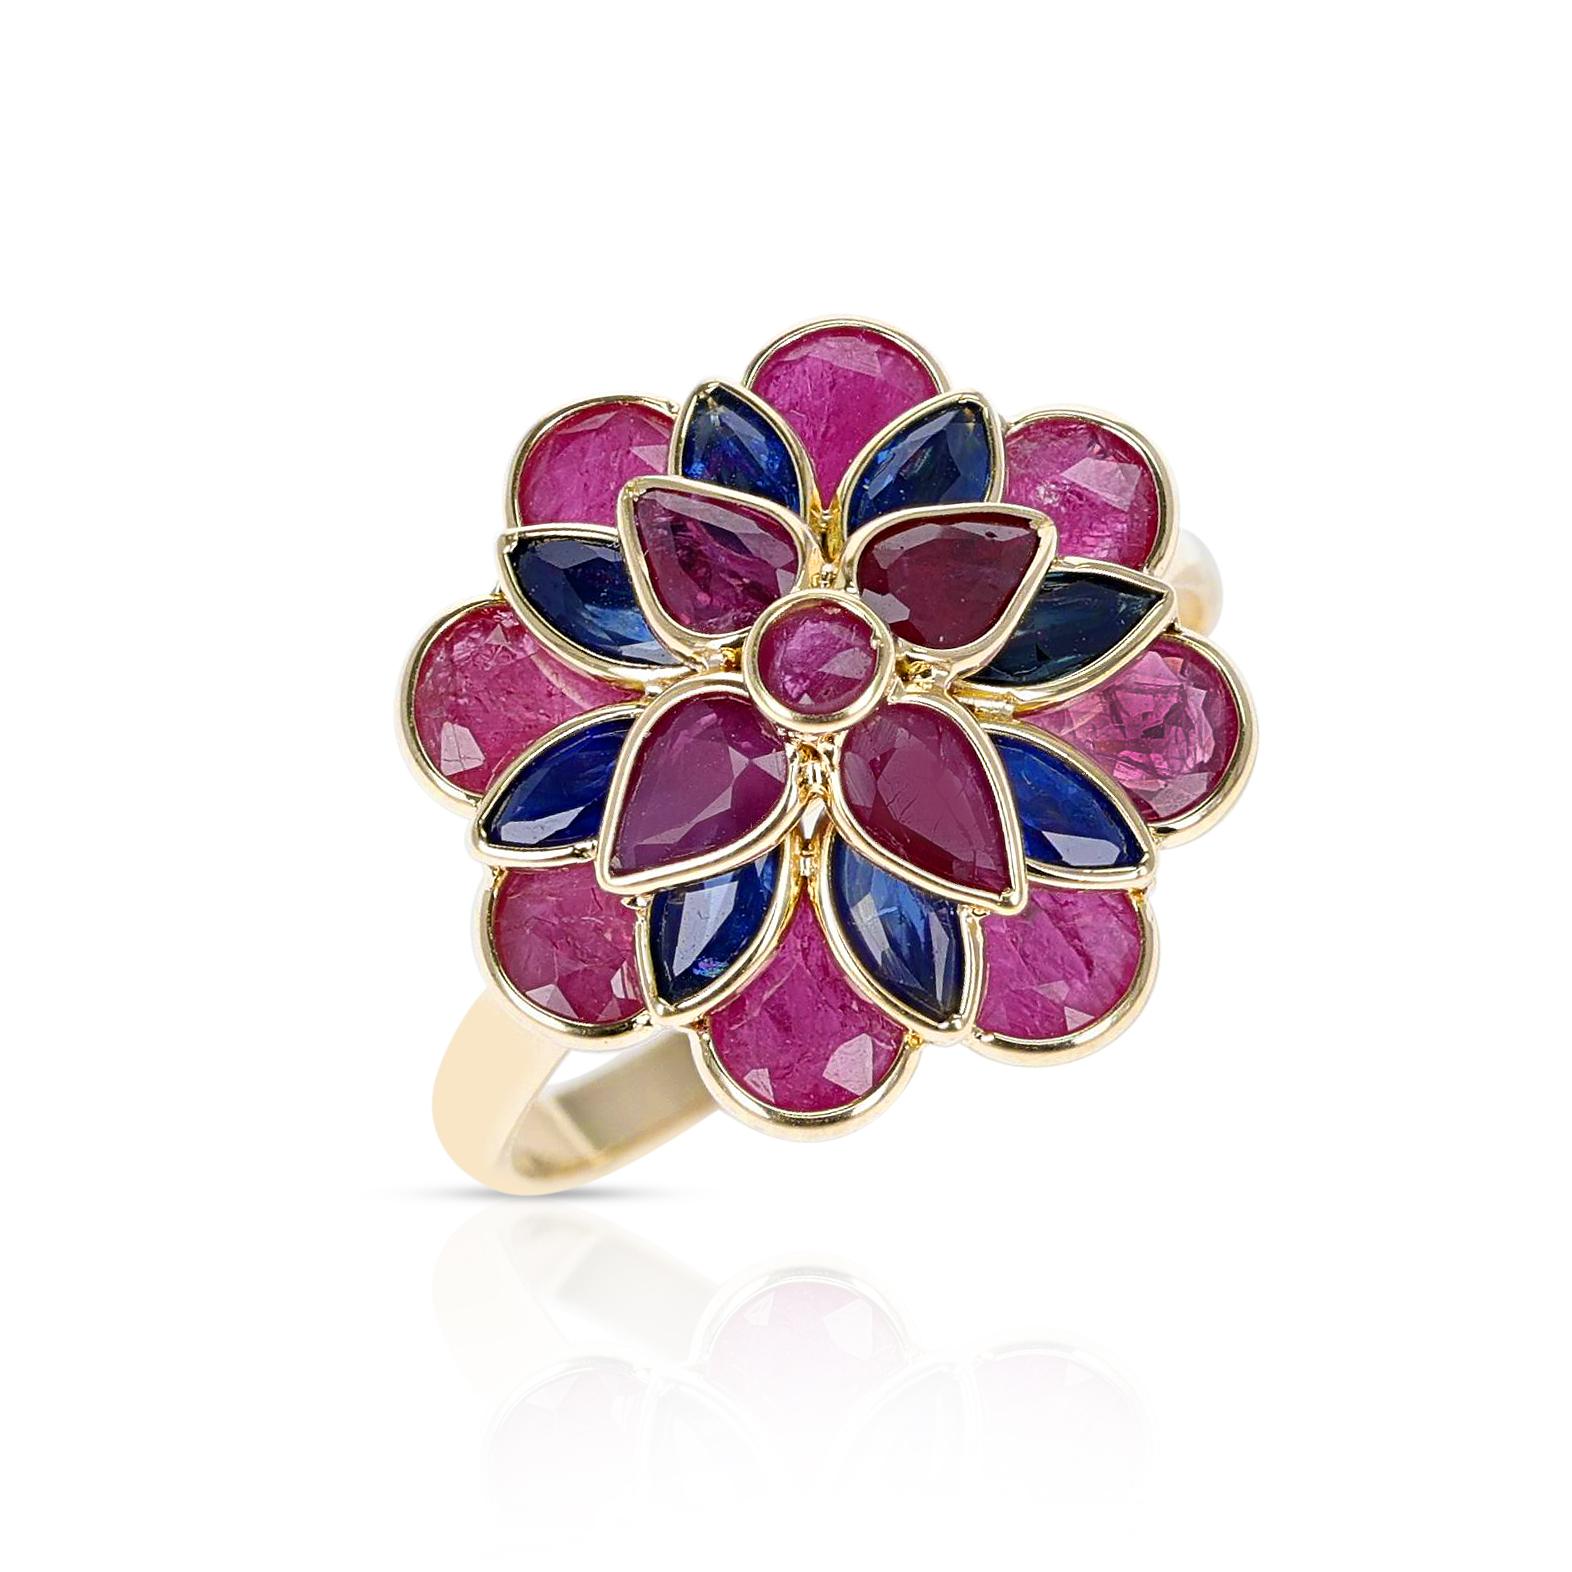 Women's or Men's Ruby and Sapphire Floral Ring, 18K Yellow Gold